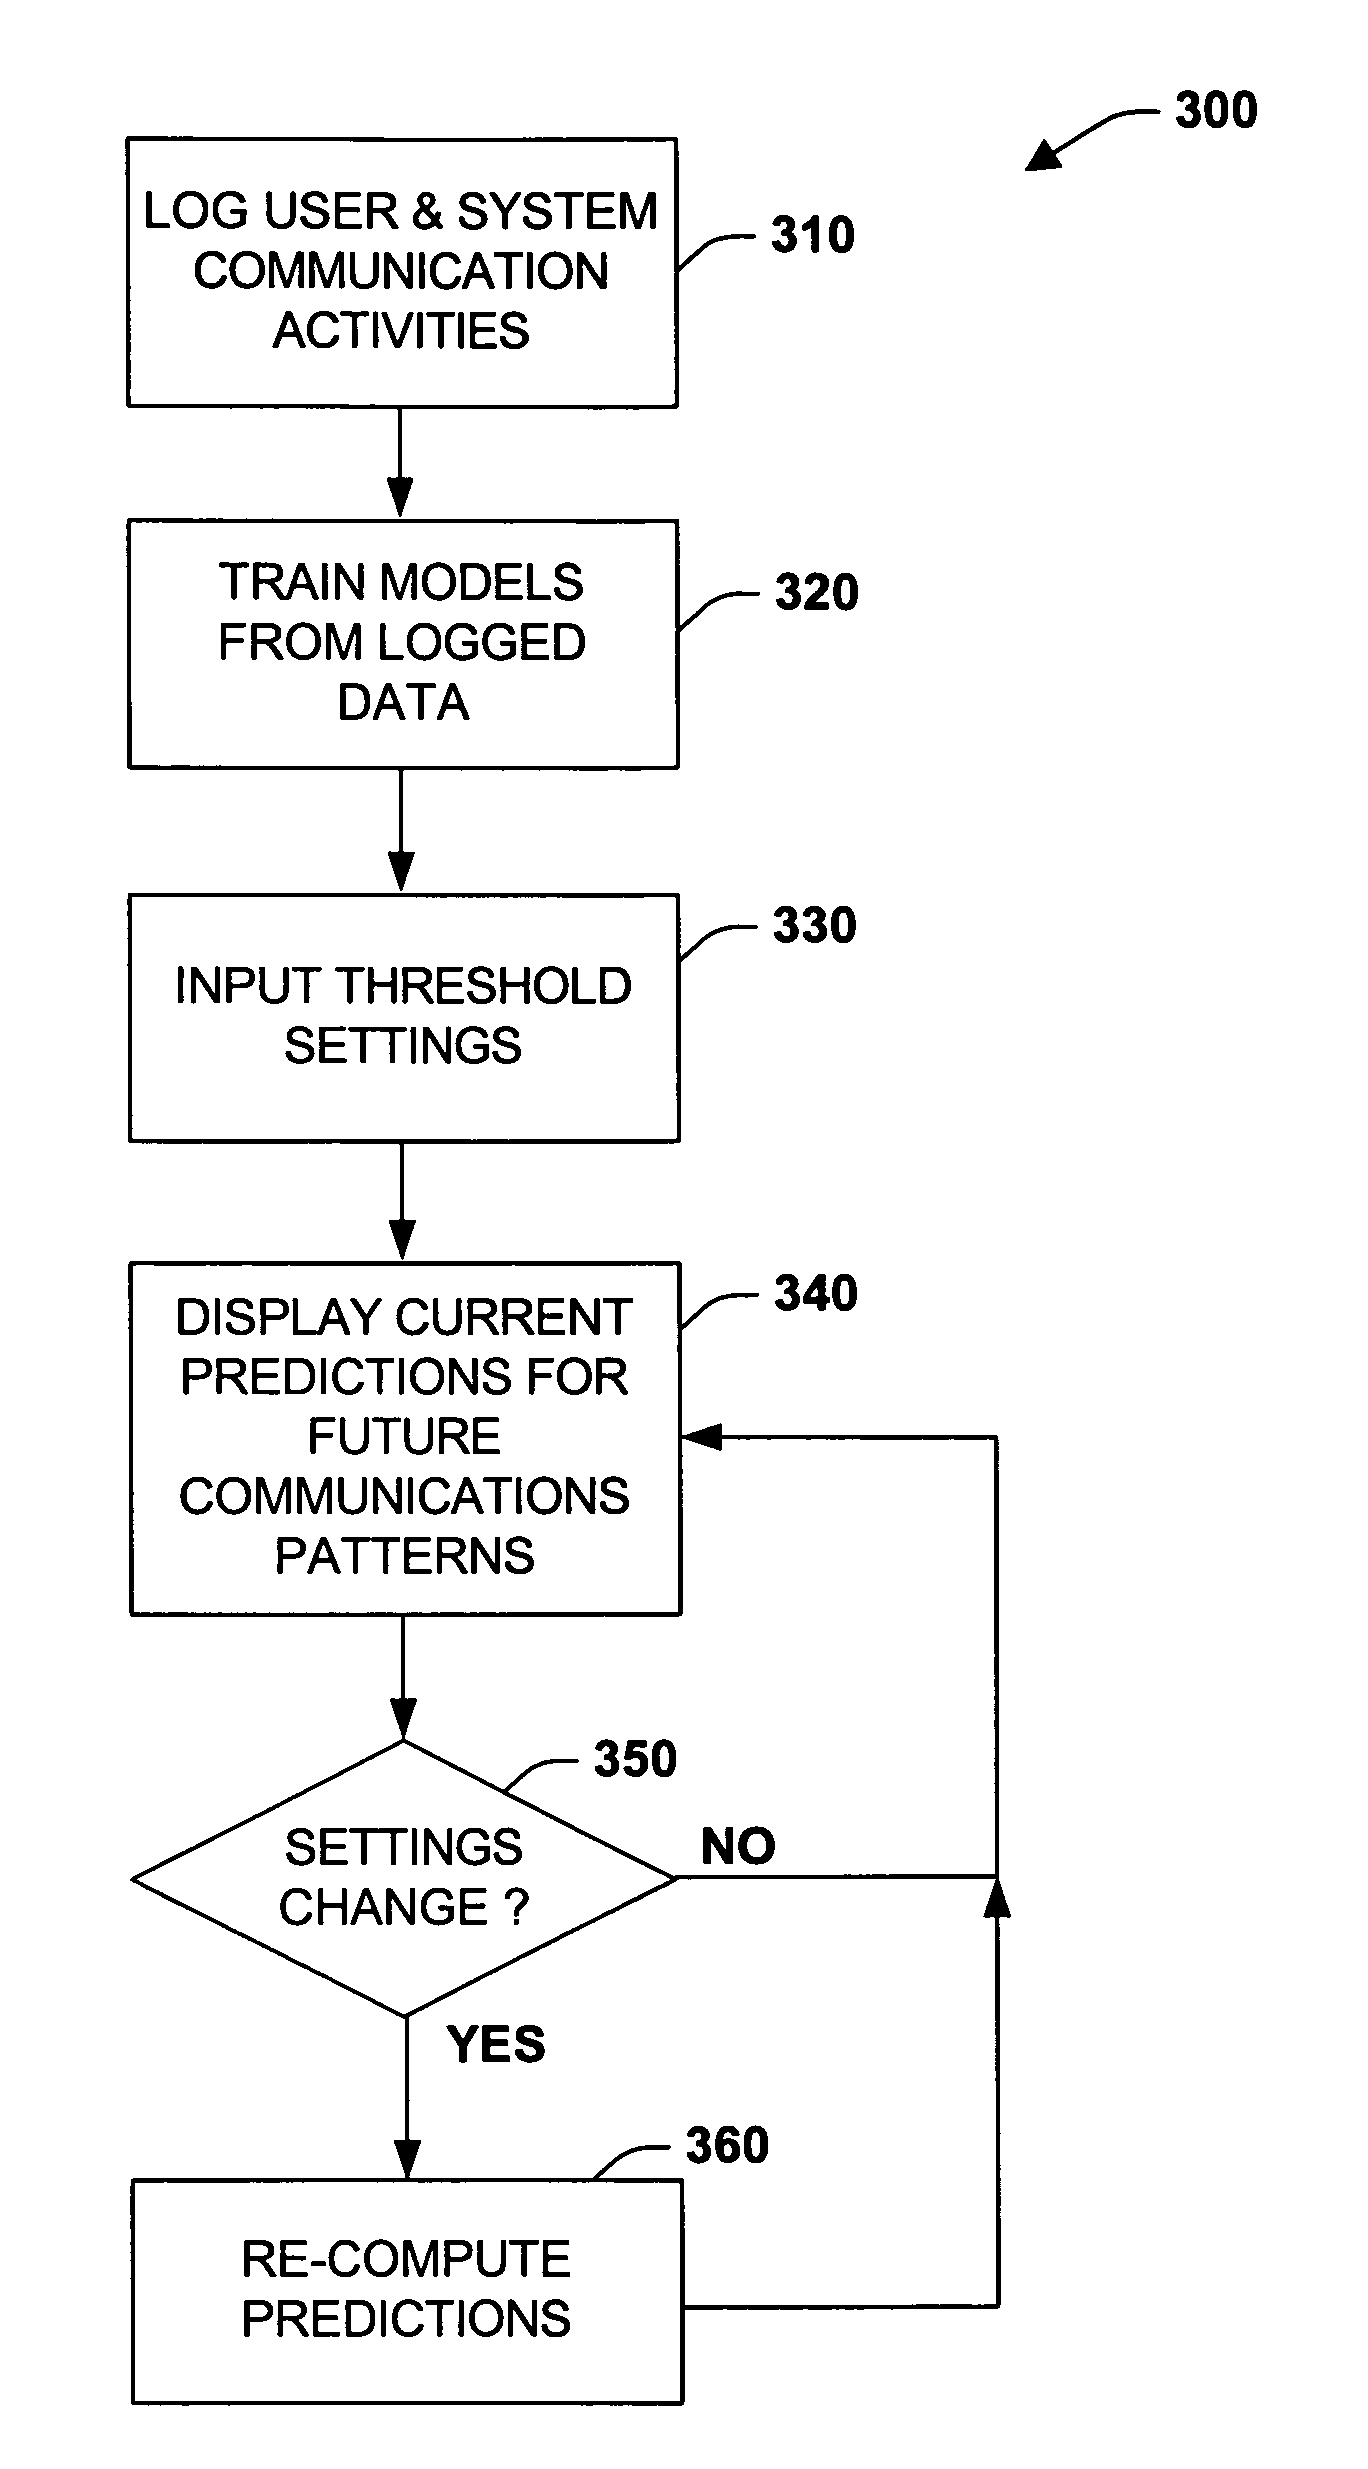 Methods and interfaces for probing and understanding behaviors of alerting and filtering systems based on models and simulation from logs